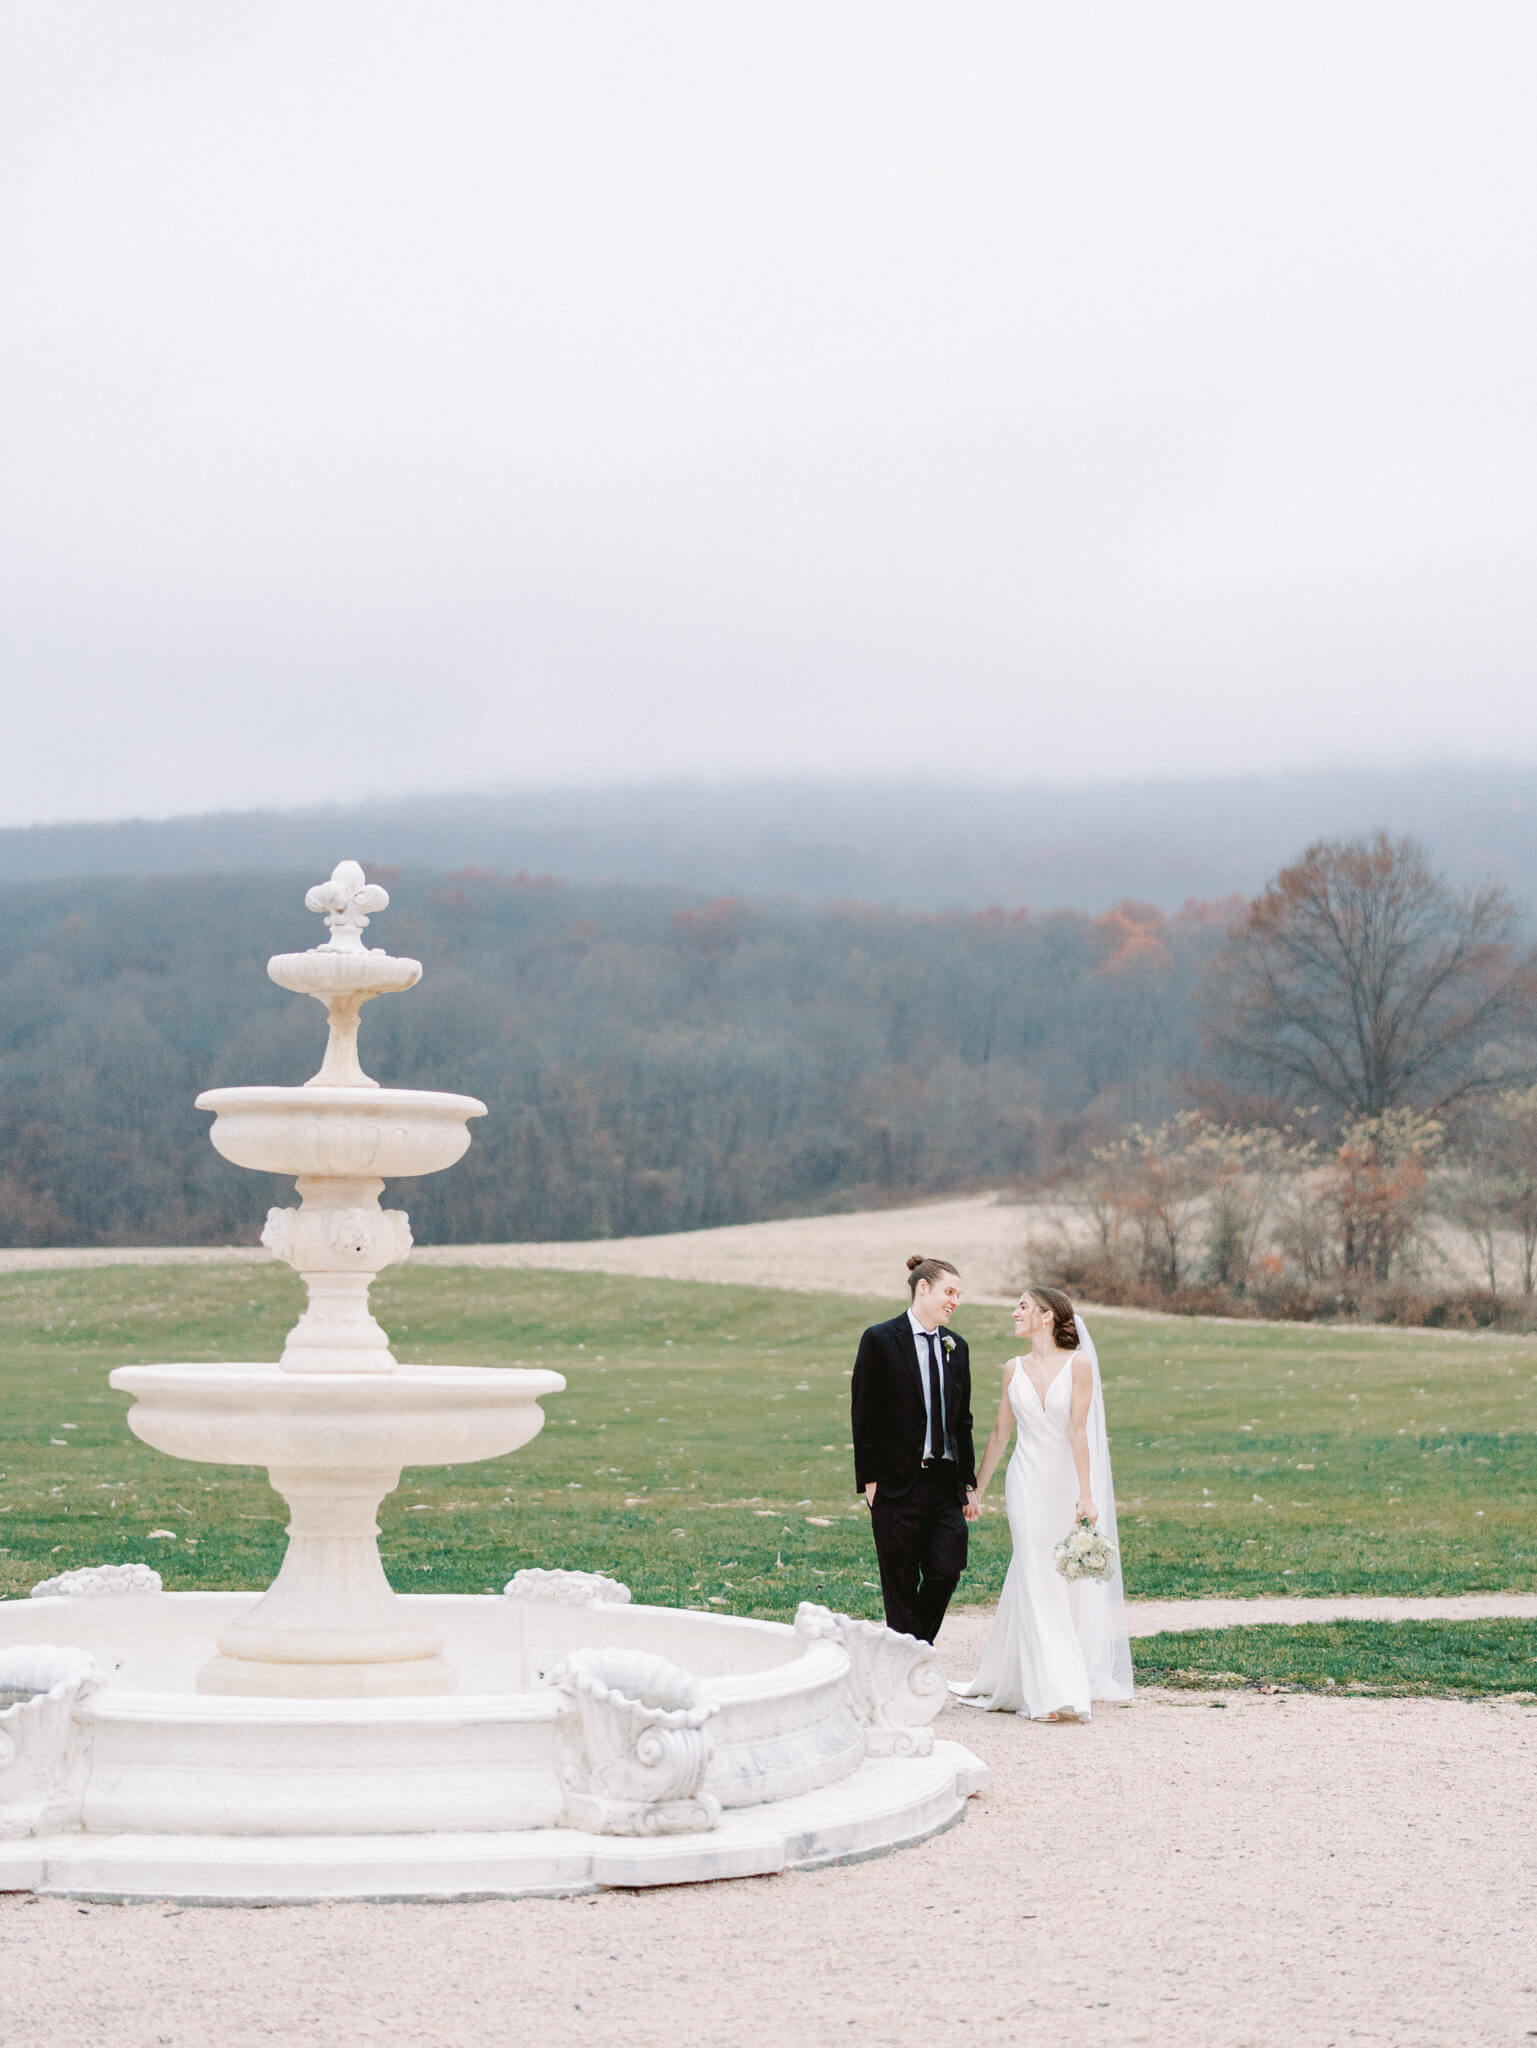 A bride and groom walking hand in hand next to Springfield Manor's fountain in front of a foggy, mountainous backdrop.